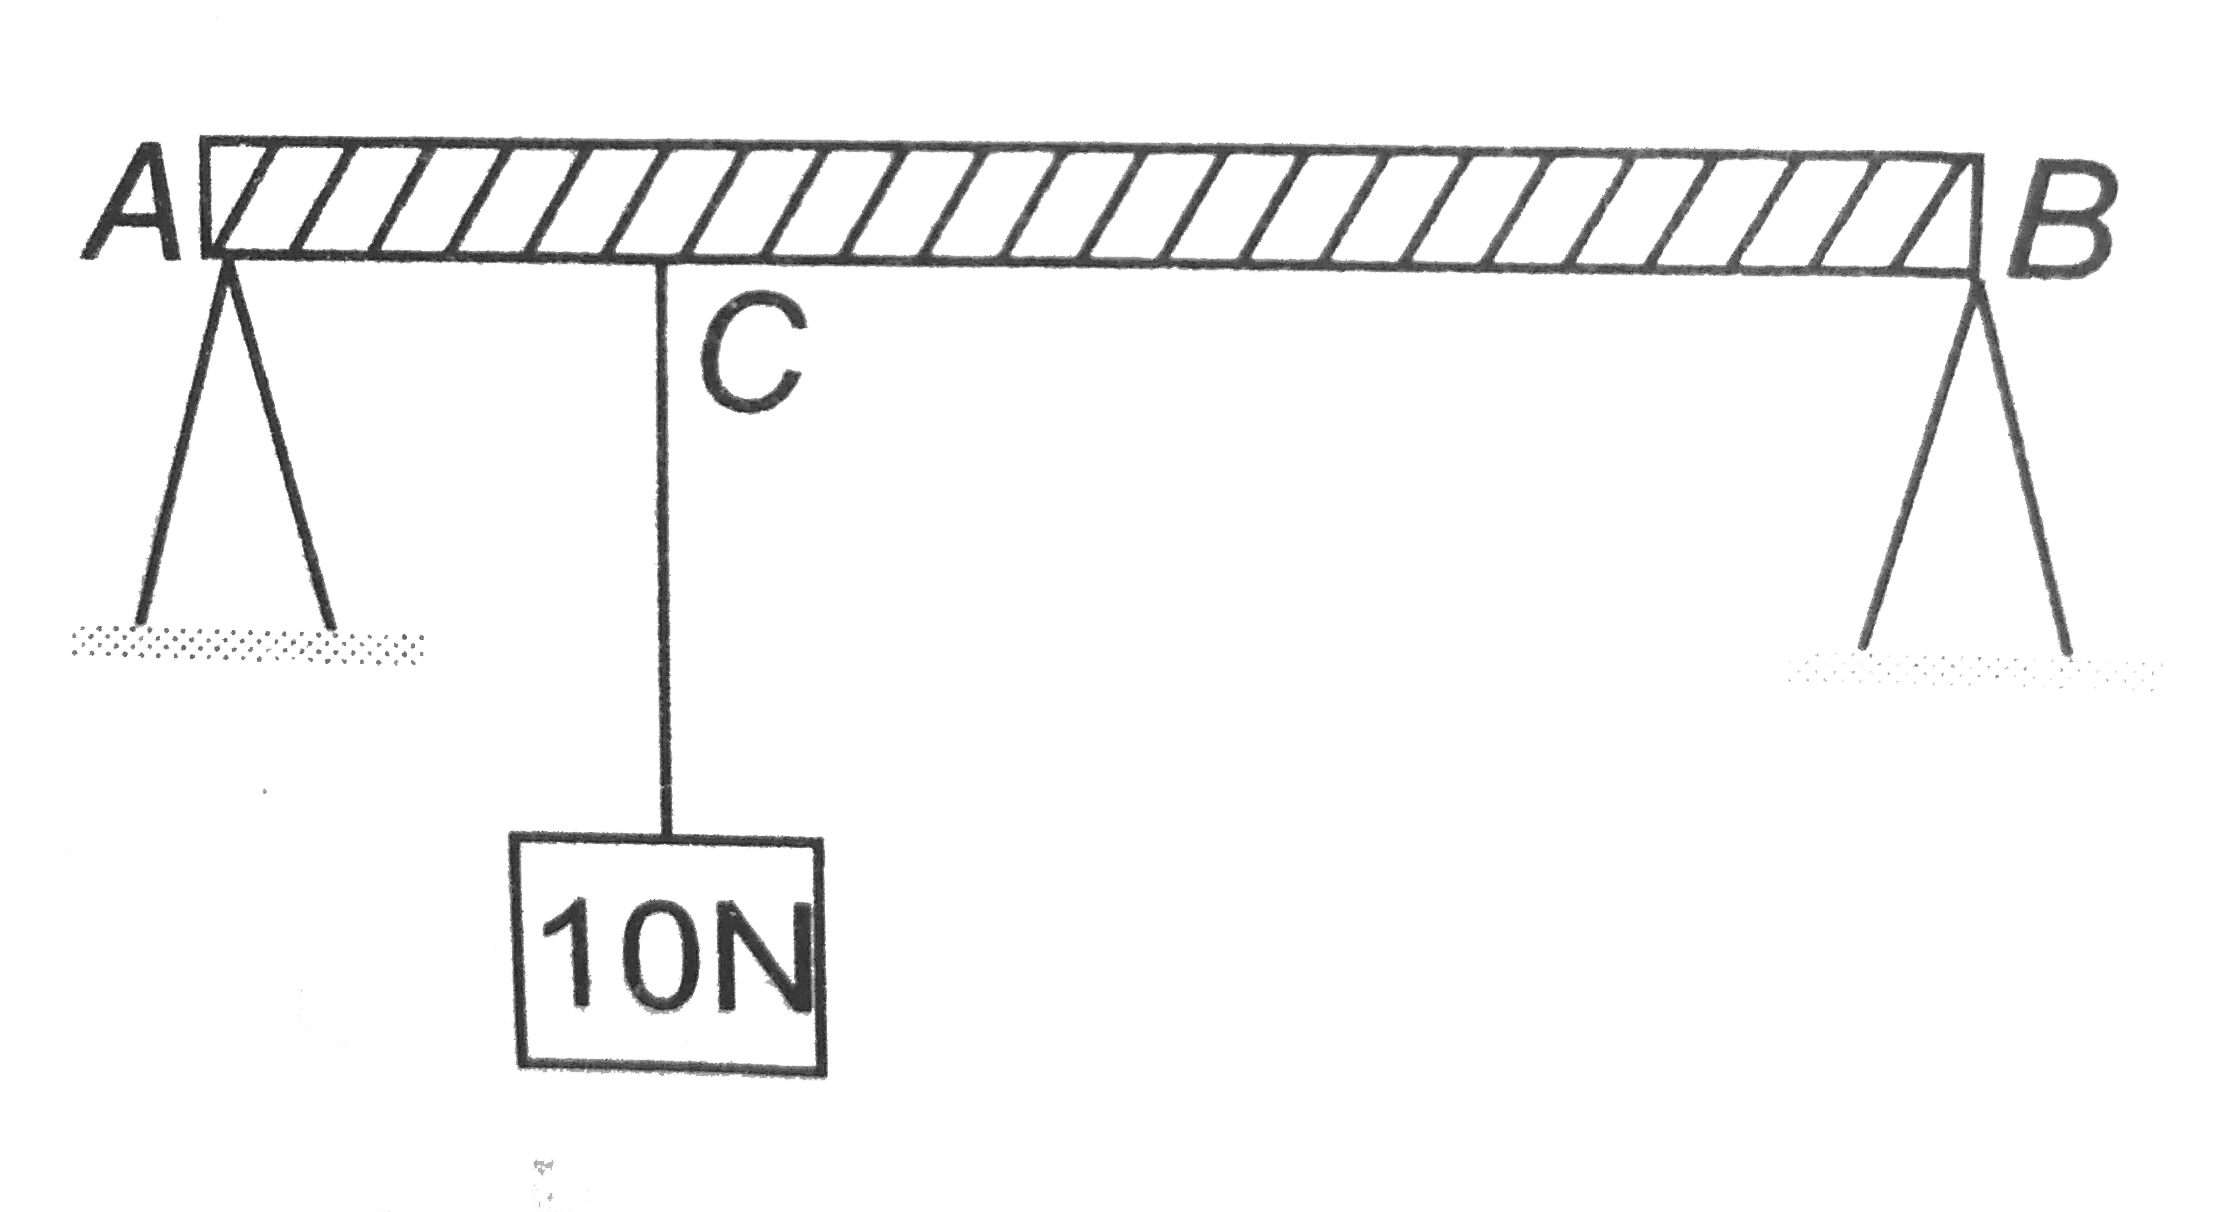 A rigid massless rod AB of length 1 m is placed horizontally on two rigid supports at its ends as showm in figure. A weight 10 N is hung from a point C at a distance 30 cm from A. Find the reactions at the supports A and B respectively.   .